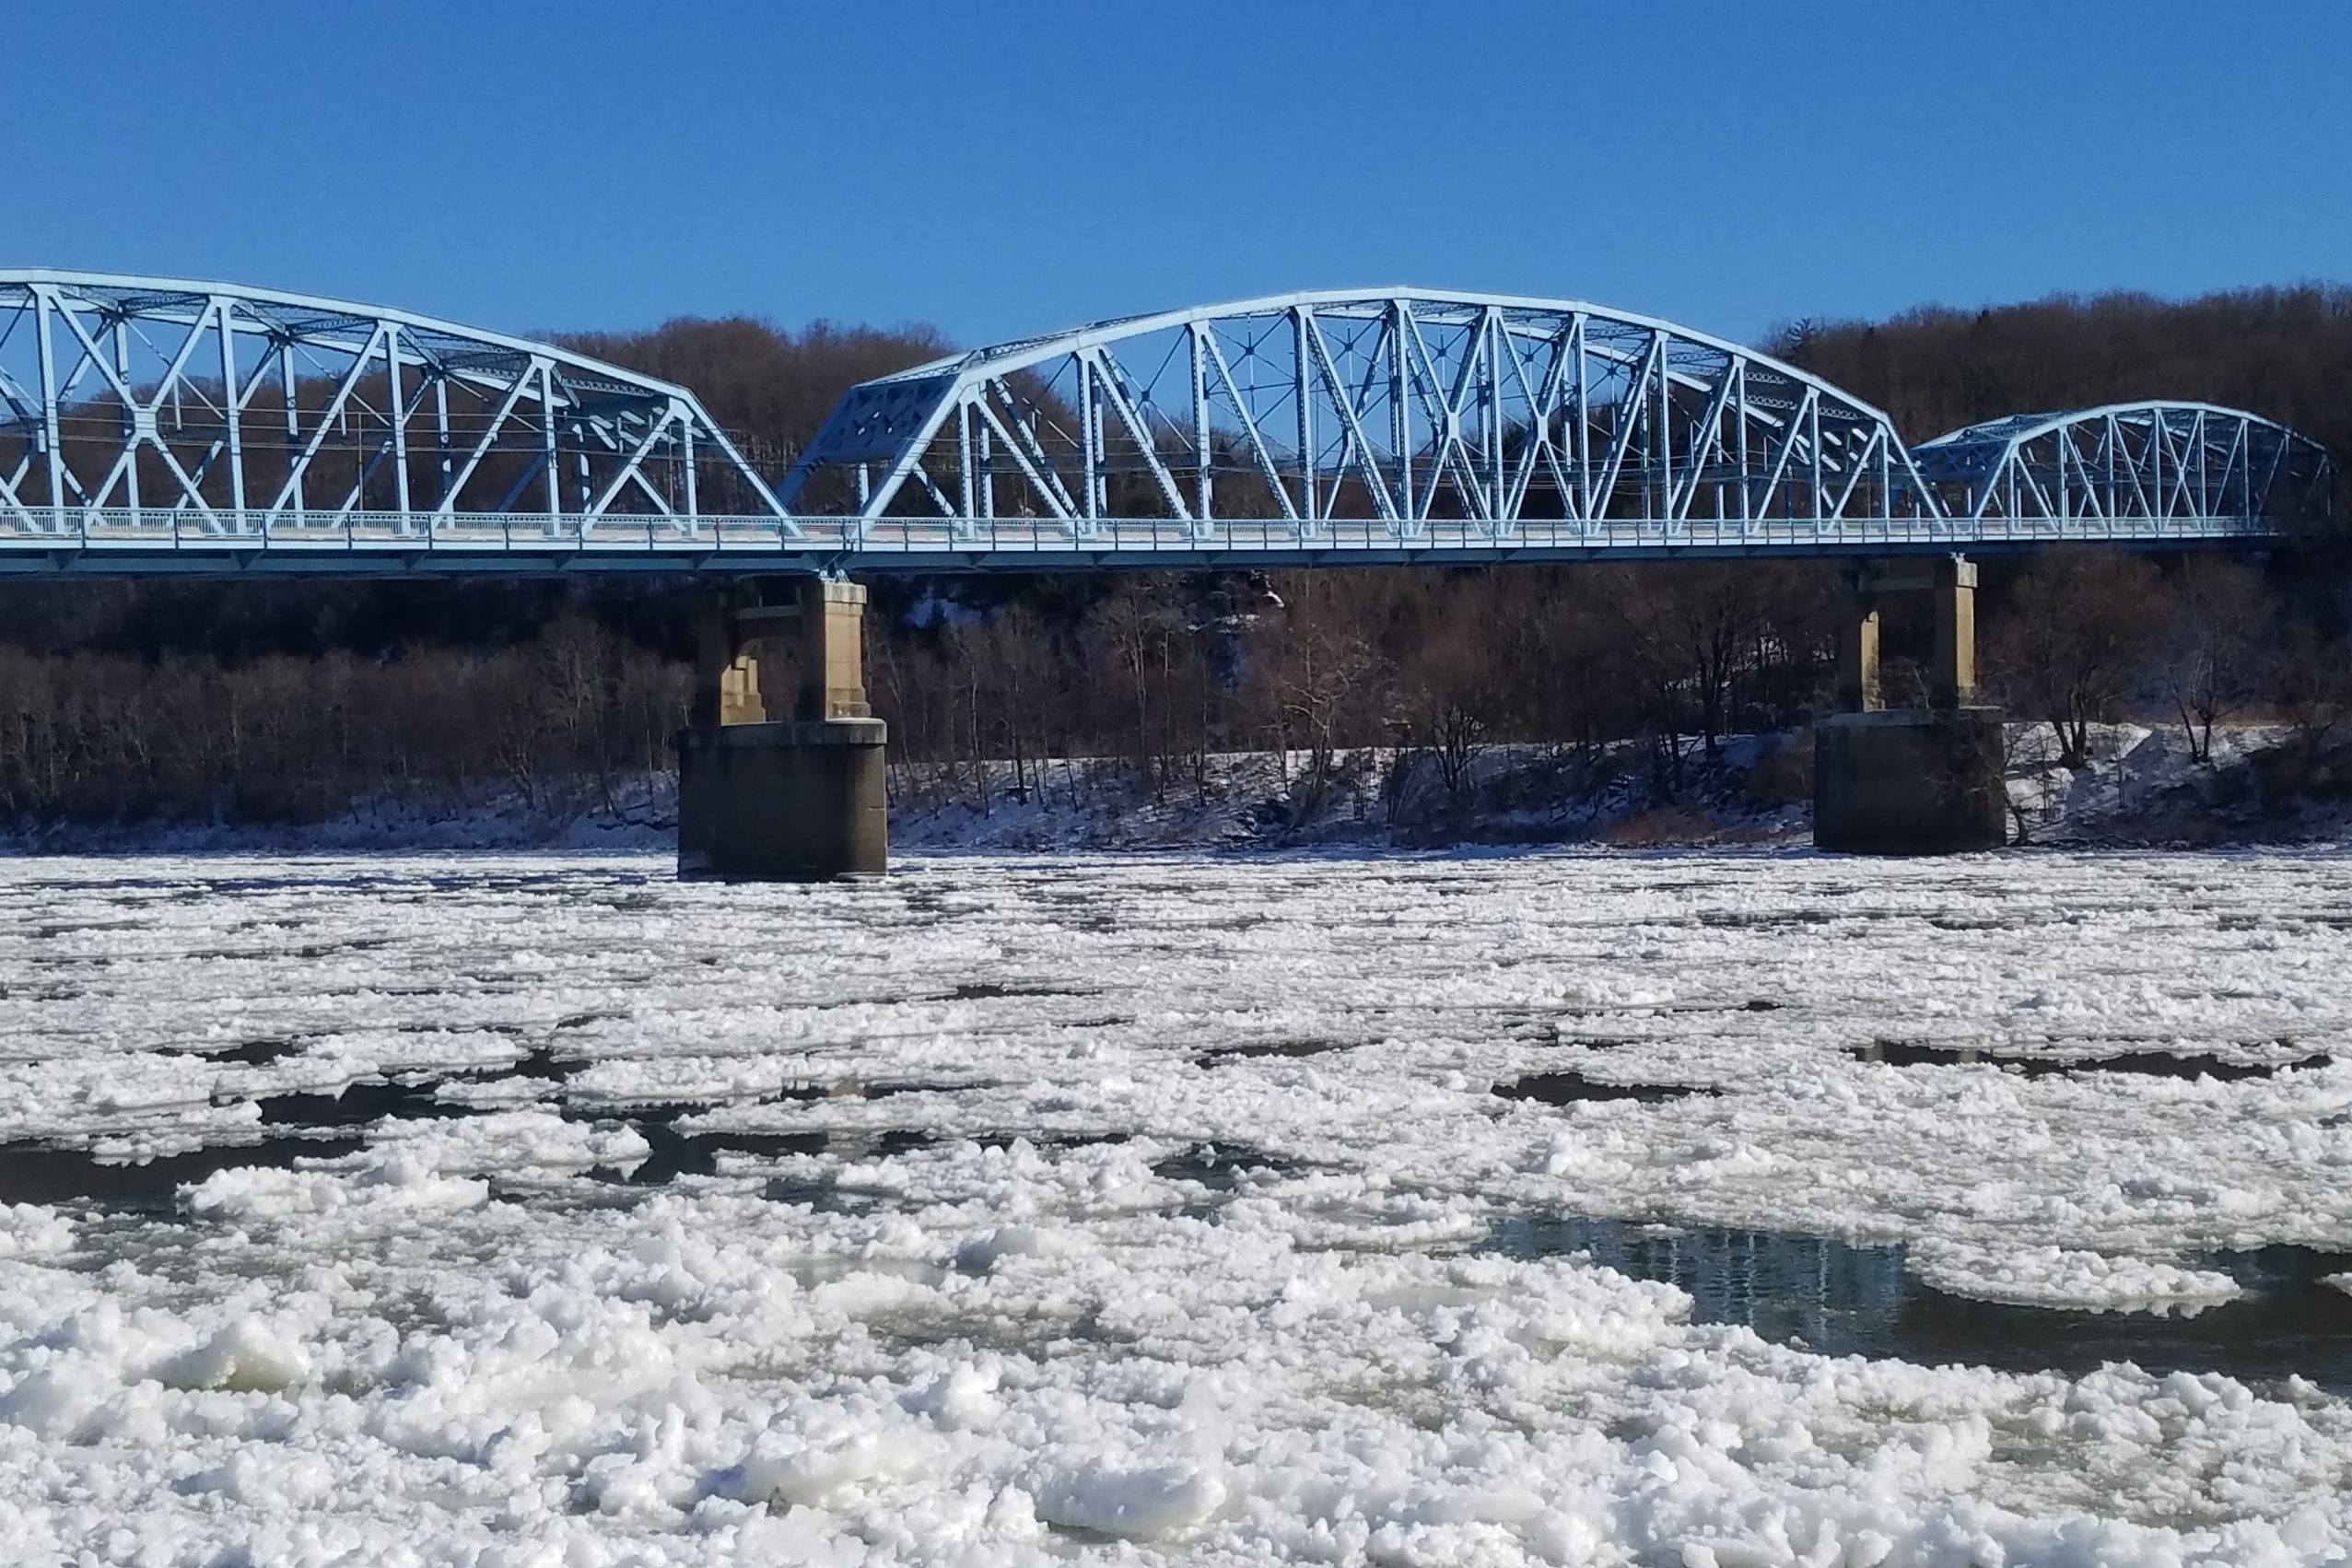 Ice on the Allegheny River